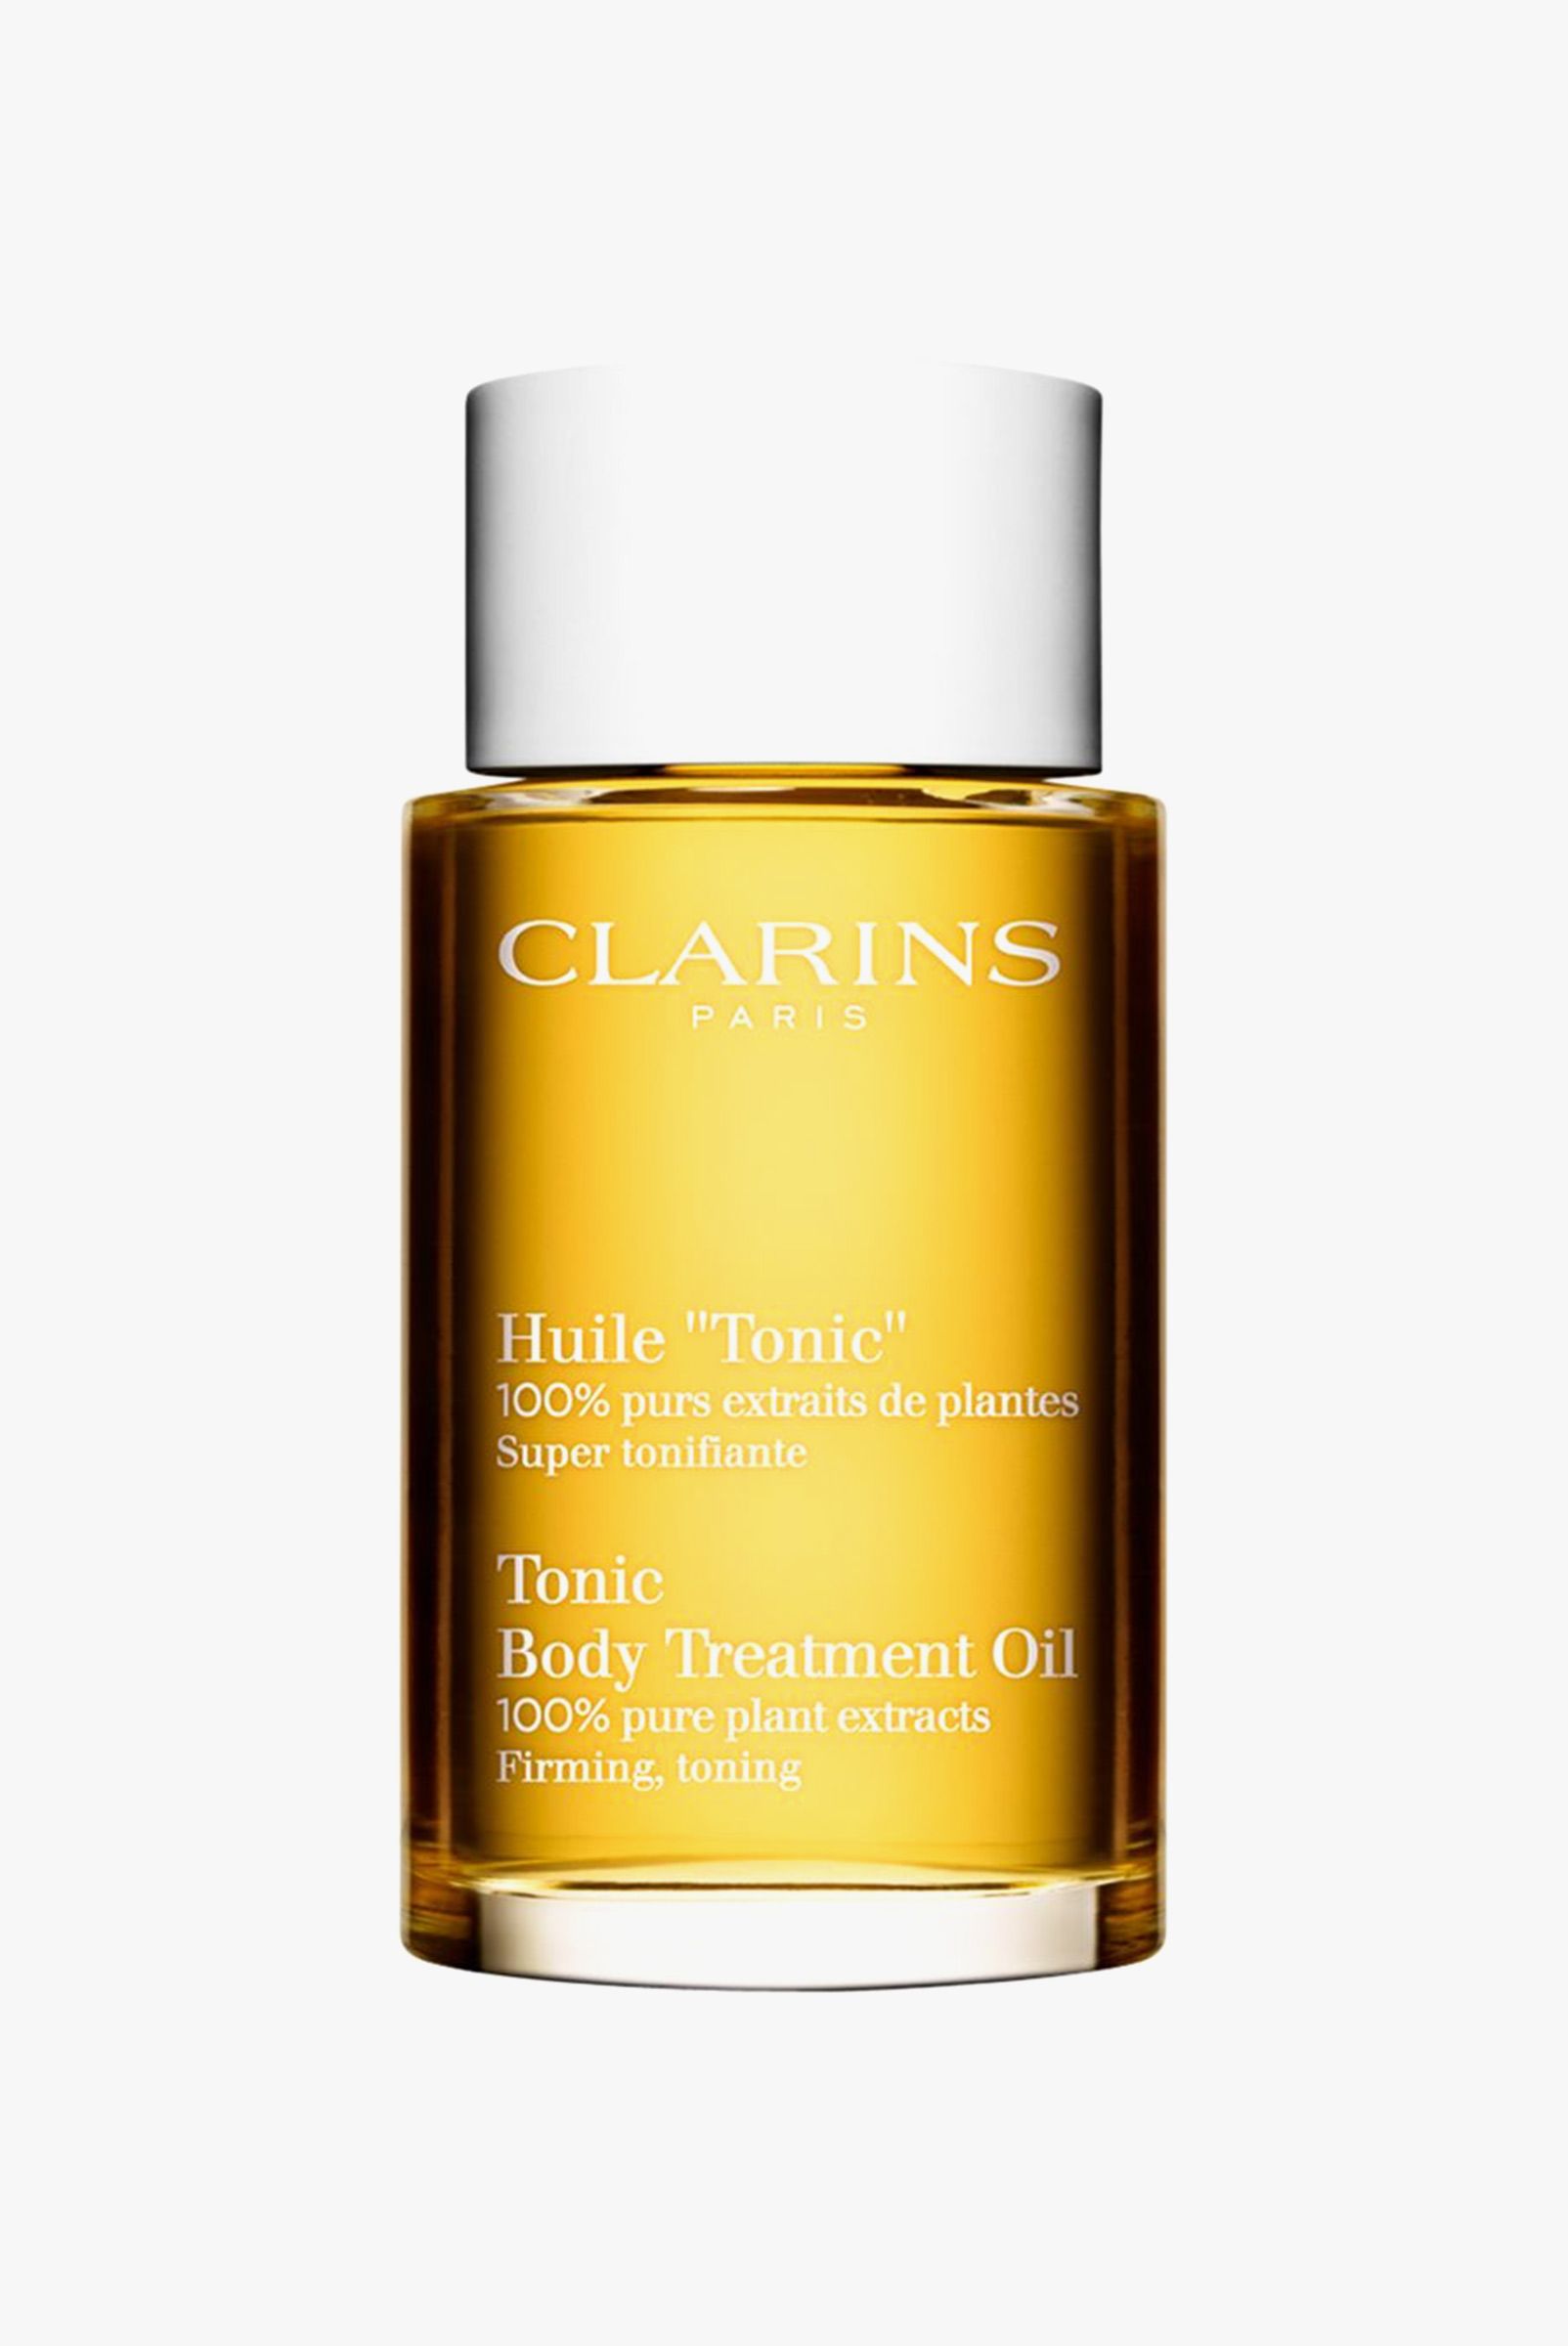 Clarins Tonic Body Treatment Oil - Firming/Toning